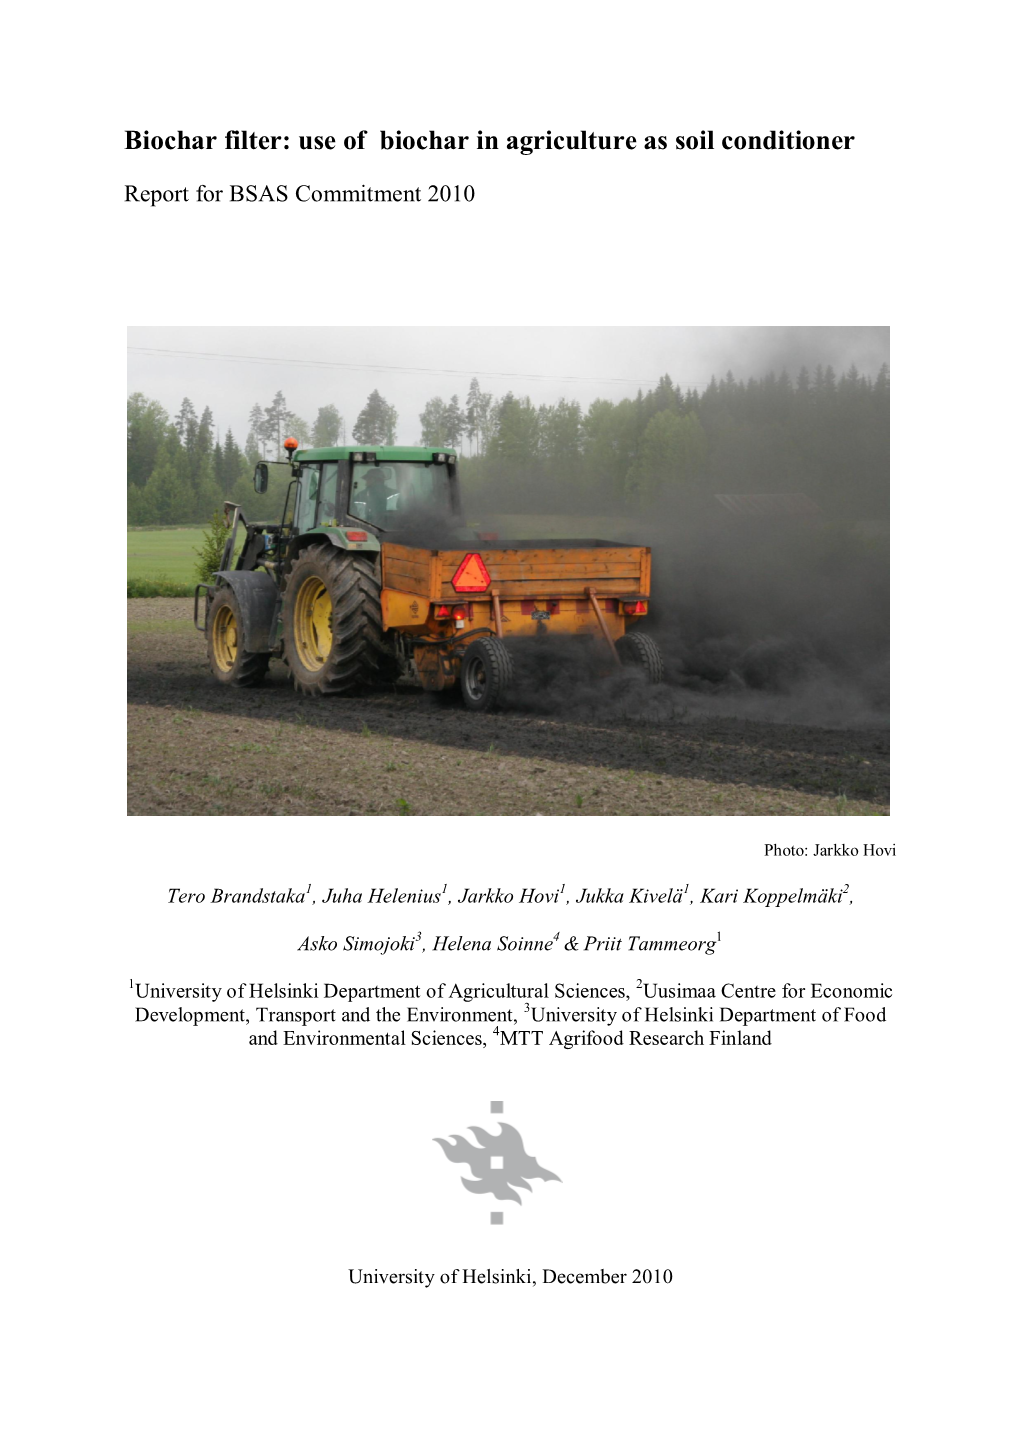 Use of Biochar in Agriculture As Soil Conditioner